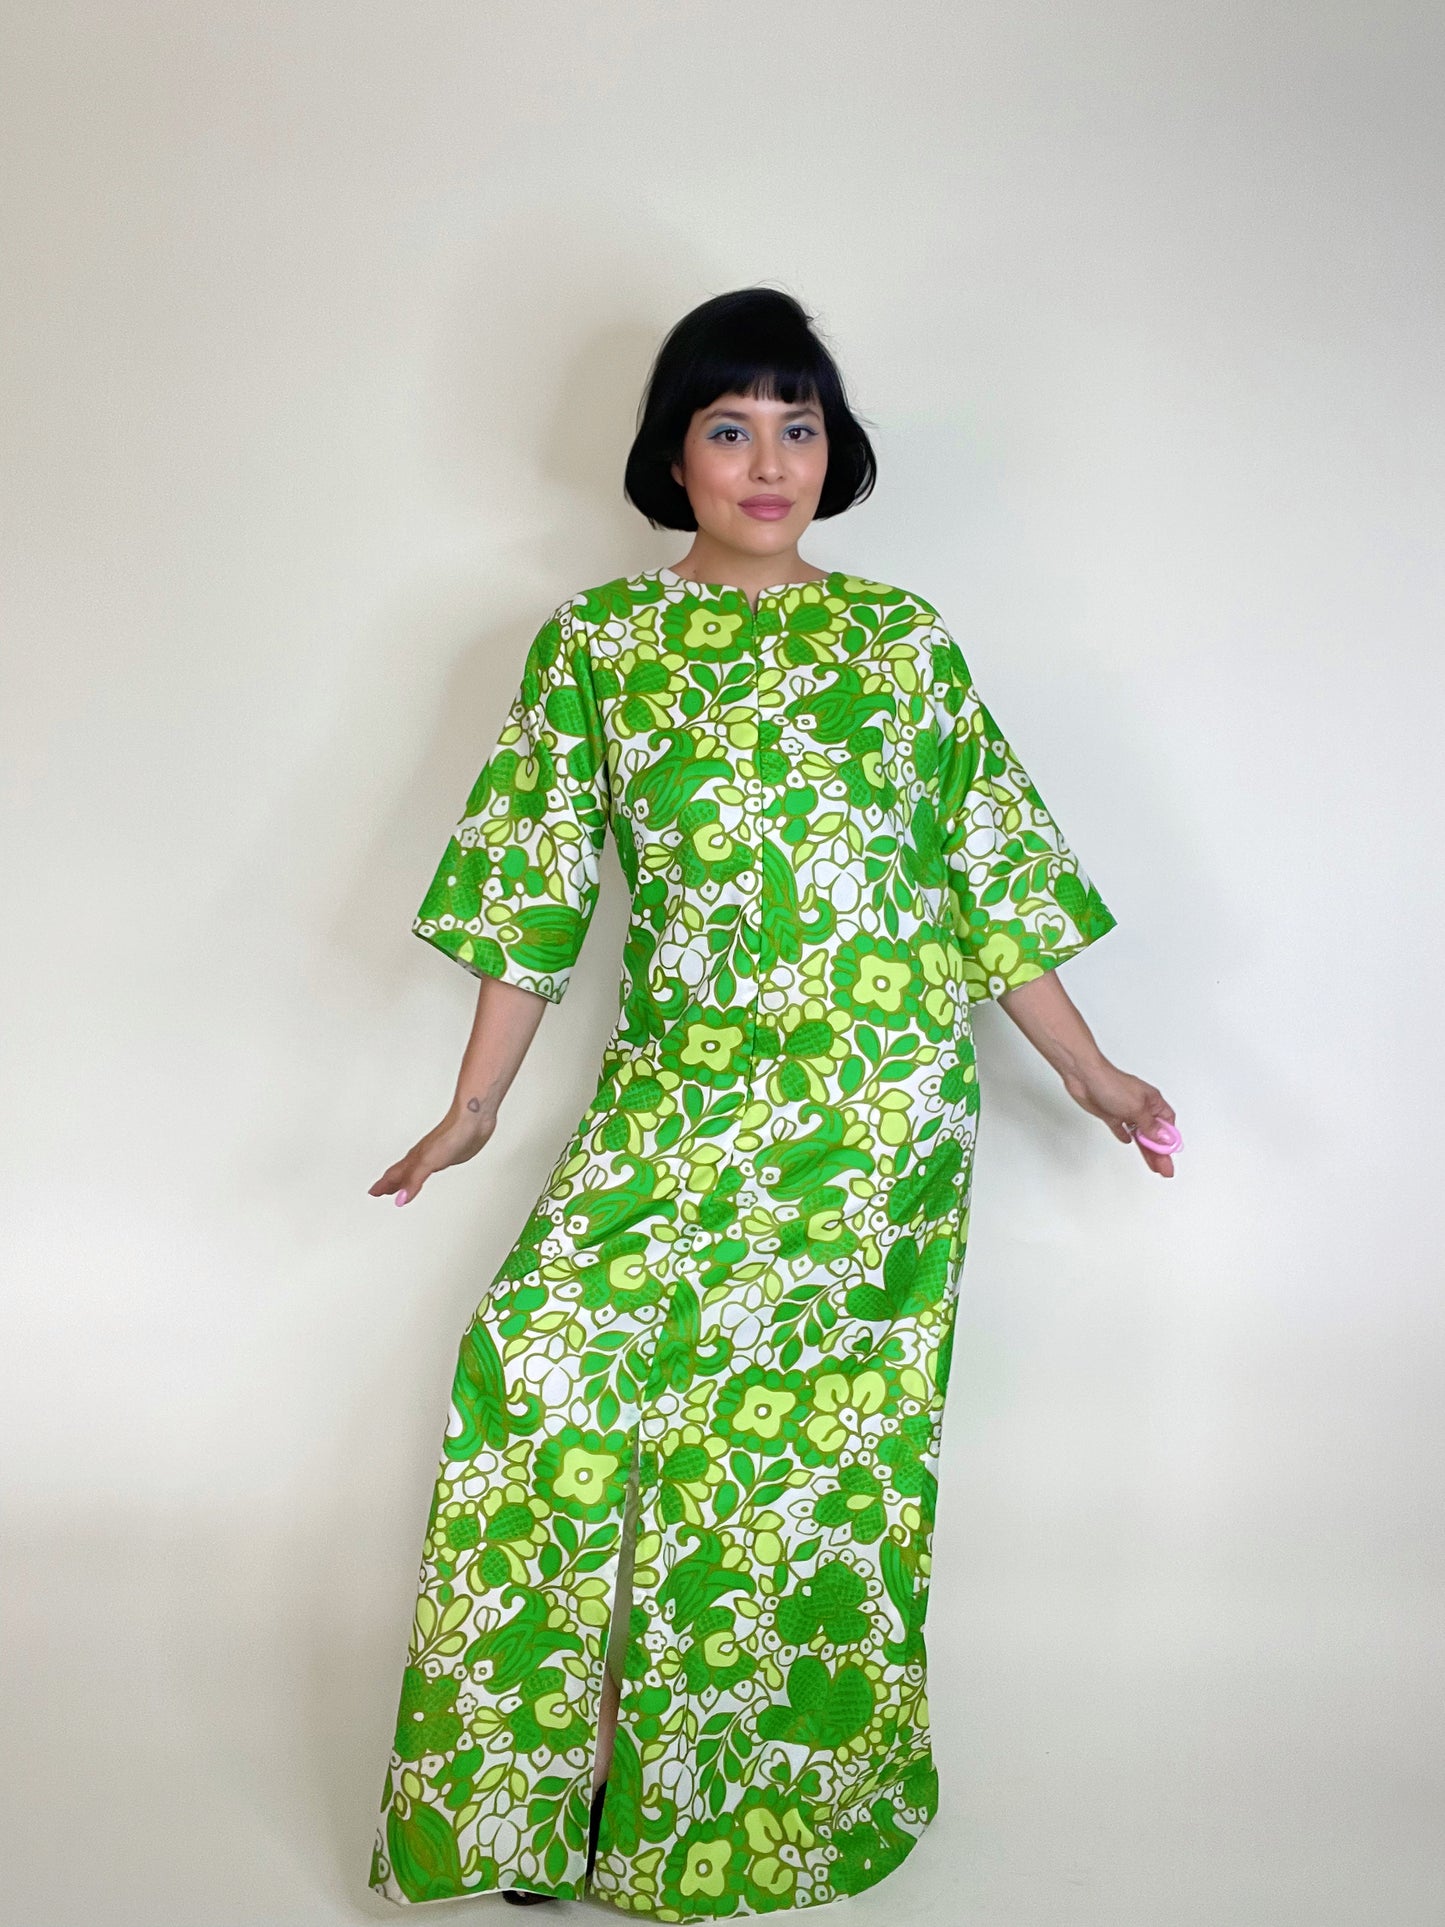 Vintage 60s Neon Green Floral Print Zip Up Front and Back Slit Dress Fits Sizes XS-M